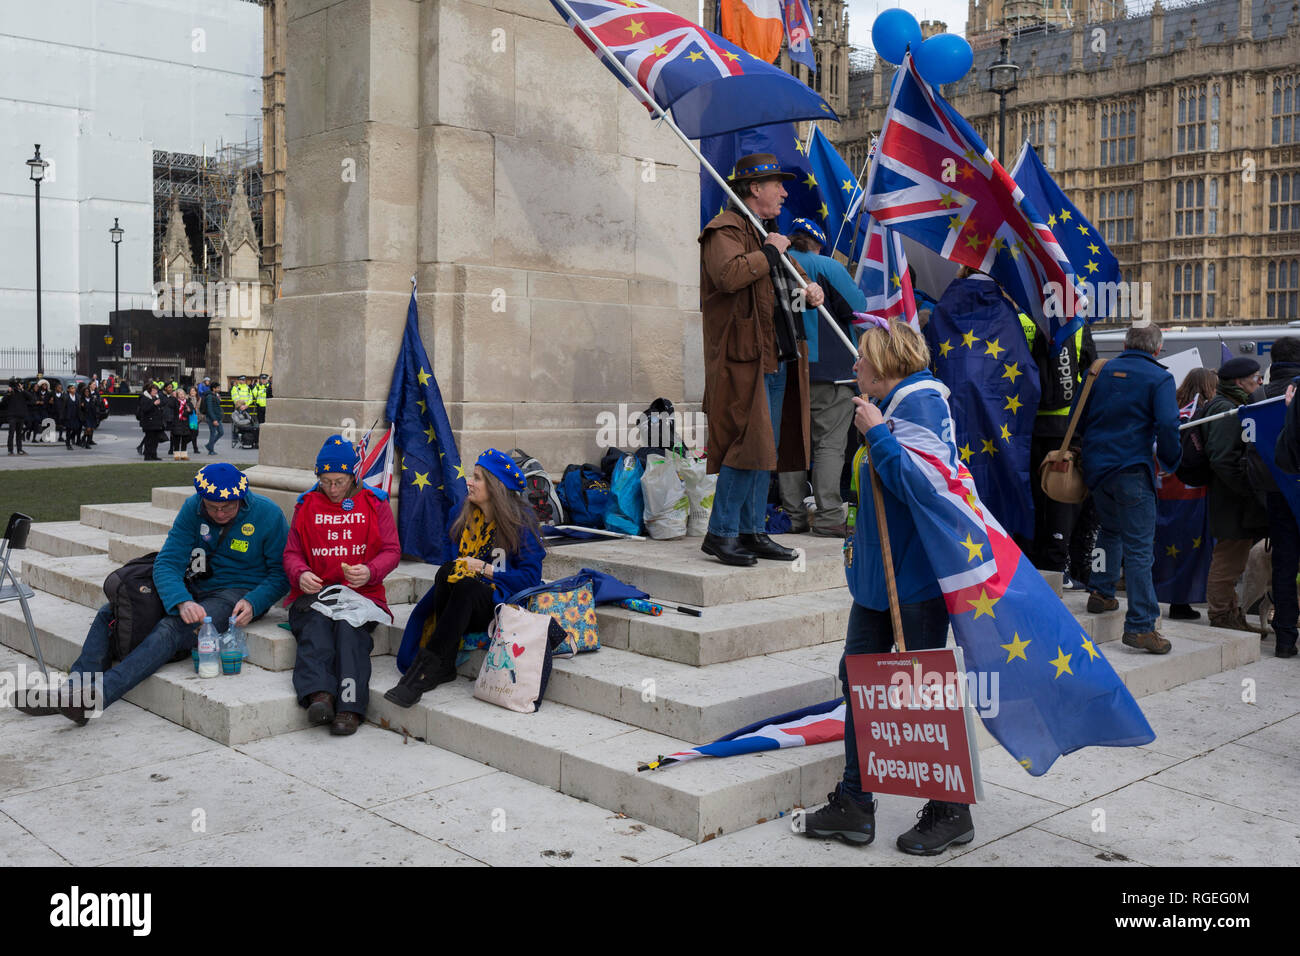 London, UK. 29th January, 2019.On the day that the UK Parliament once again votes on an amendment of Prime Minister Theresa May's Brexit deal that requires another negotiation with the EU in Brussels, pro-EU protesters gather outside the House of Commons, on 29th January 2019, in Westminster, London, England. Photo by Richard Baker / Alamy Live News. Stock Photo